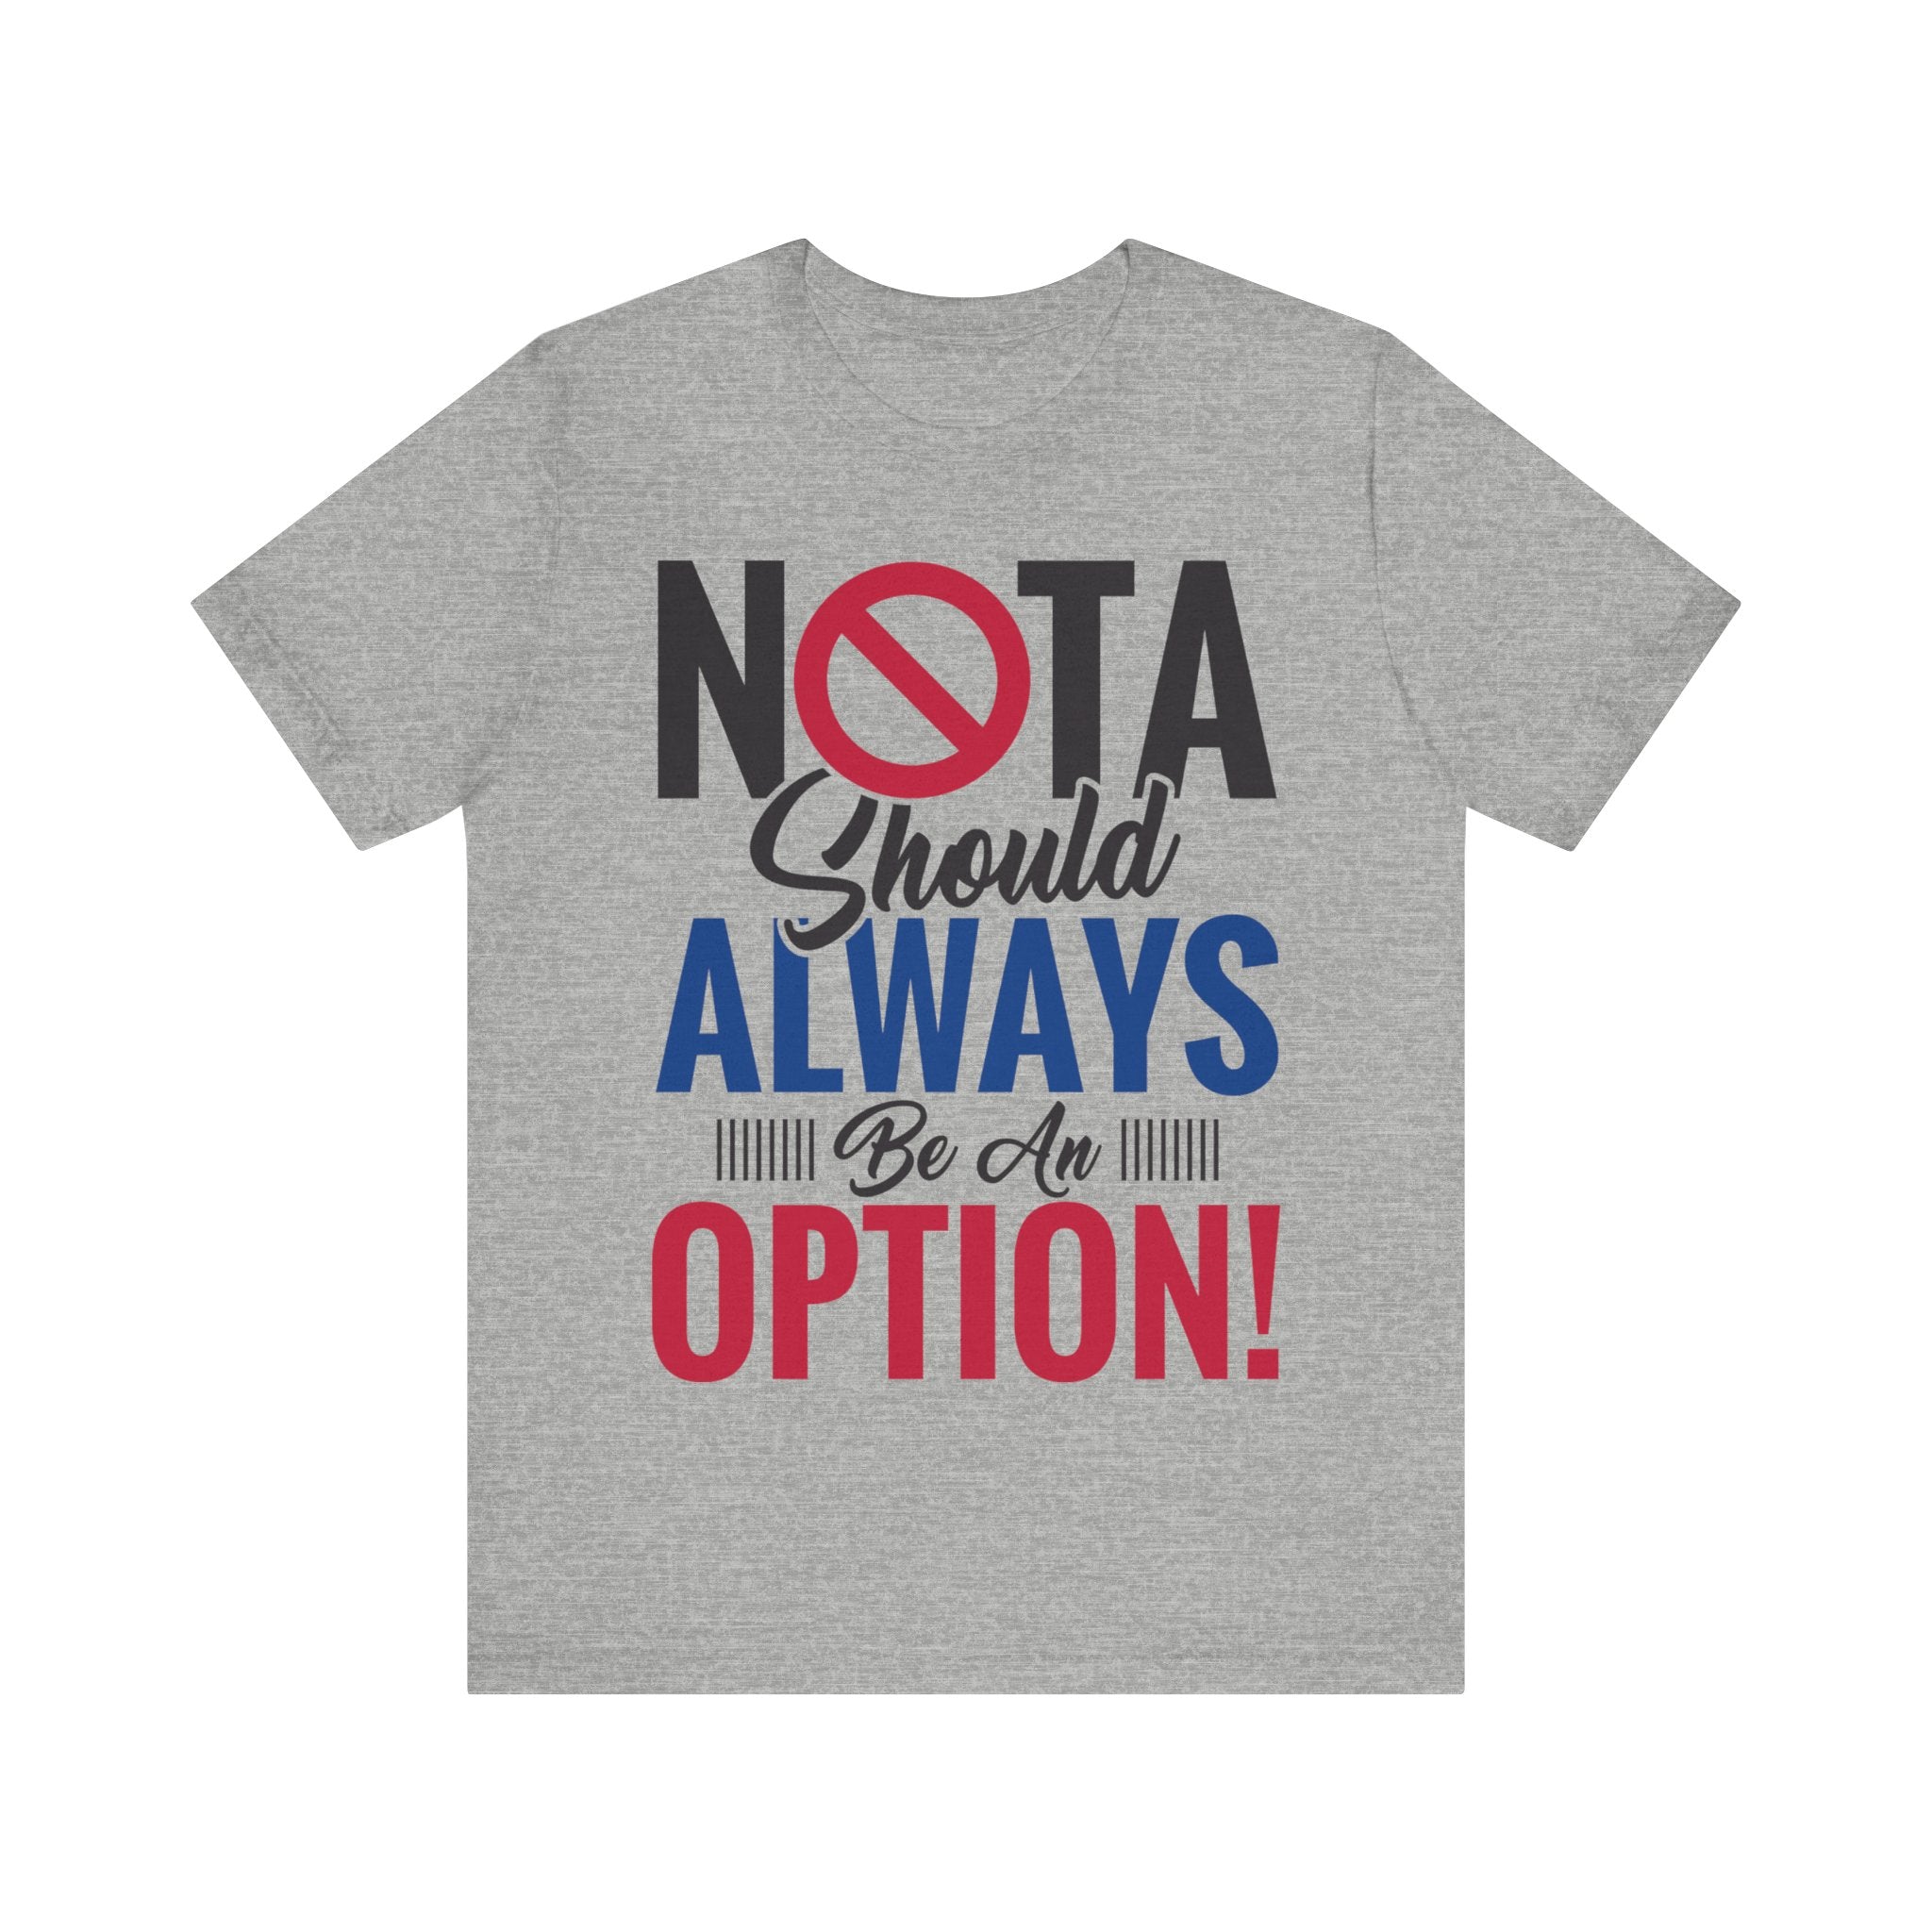 NOTA Should Always Be An Option!